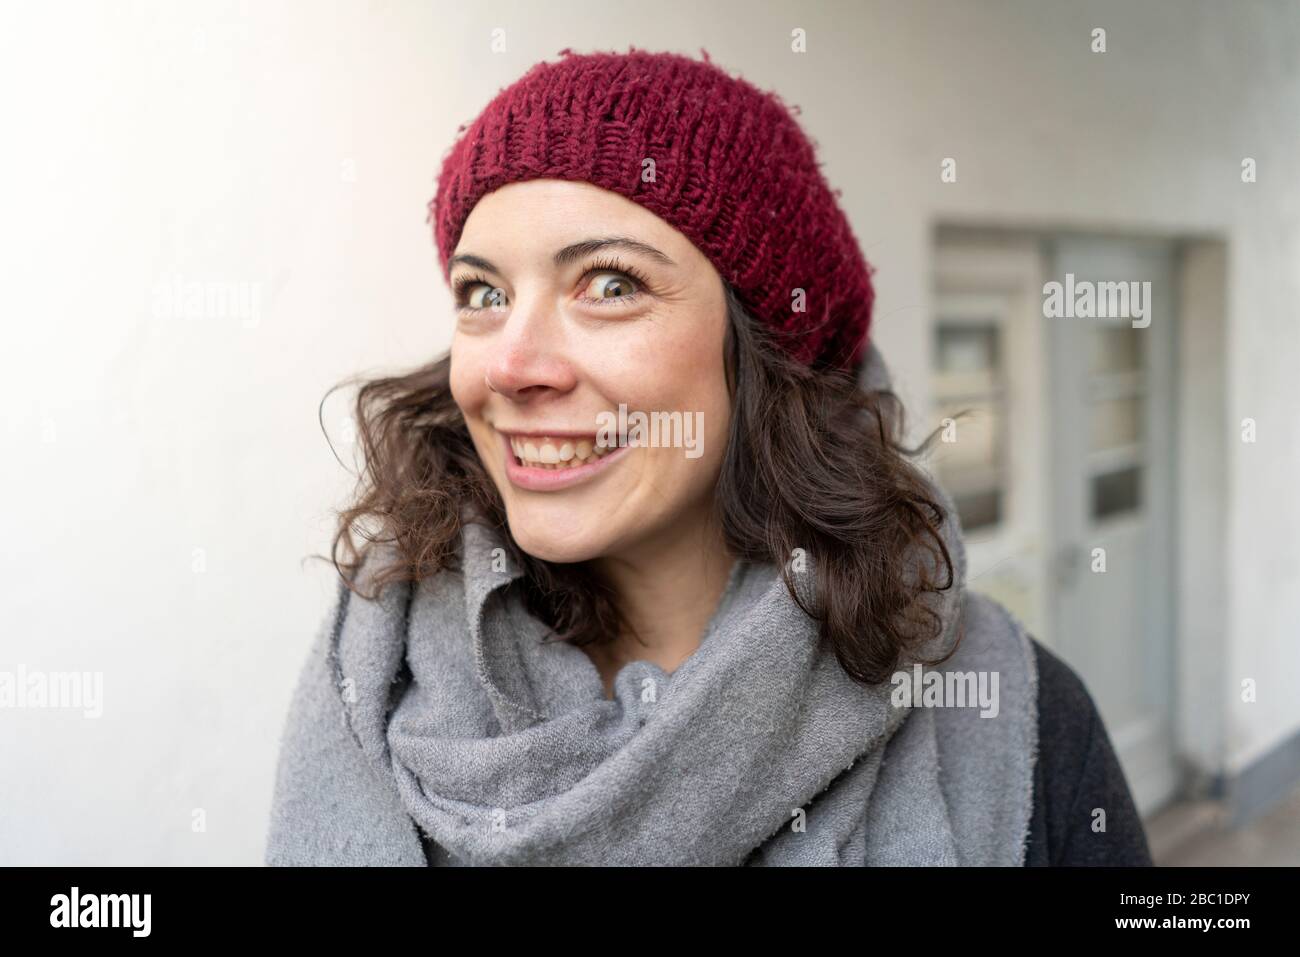 Portait of smiling woman in winter clothes Stock Photo